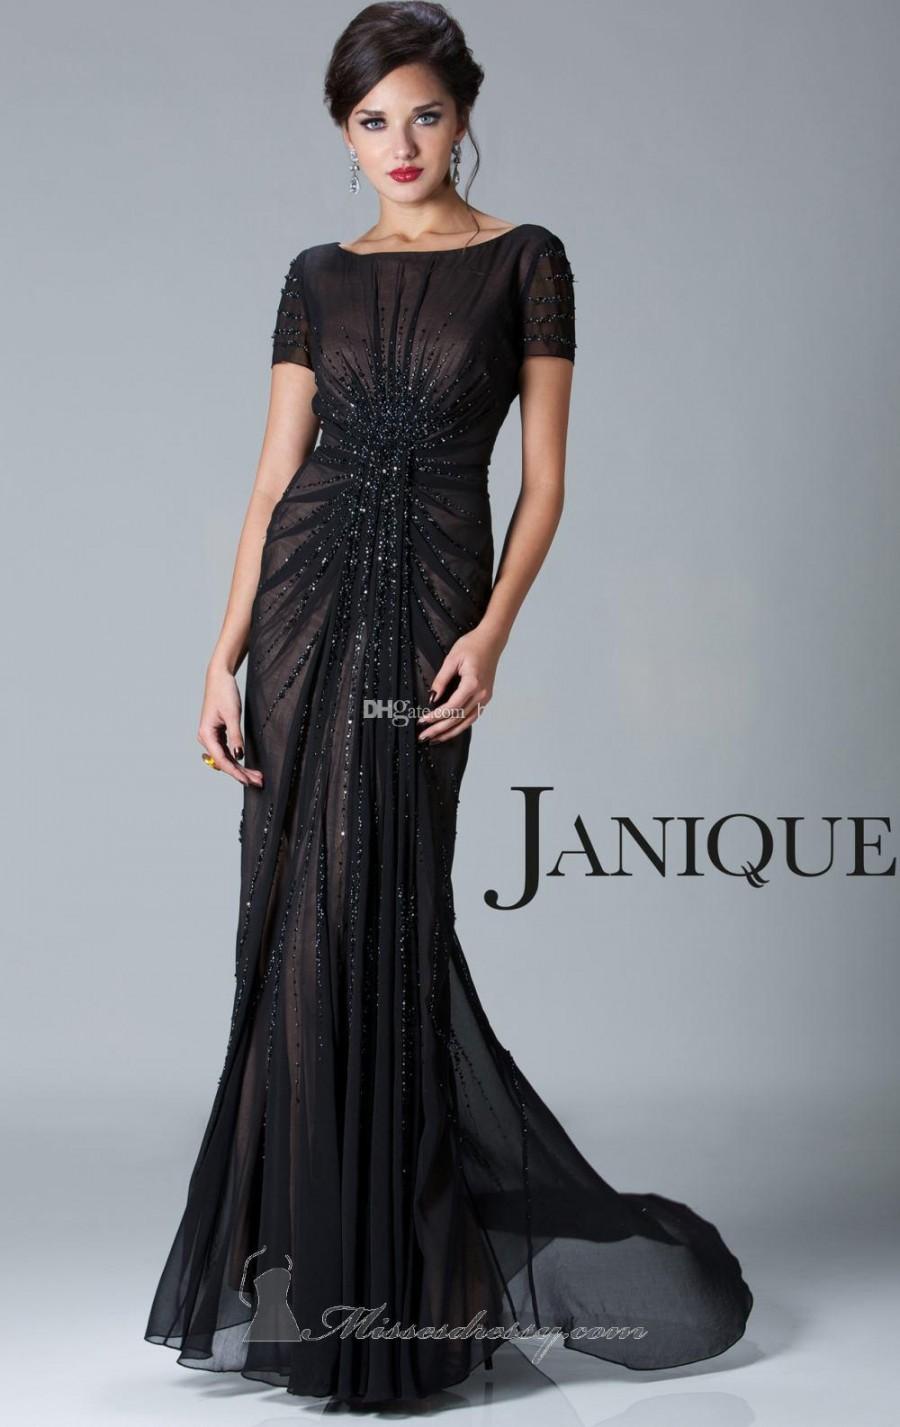 Mariage - Cap Sleeves Gown by Janique 2013 Sexy New Jewel Short Sleeve Crystals Ruffles Chiffon Black Mother Of The Bride Dresses 3302 Online with $140.63/Piece on Hjklp88's Store 